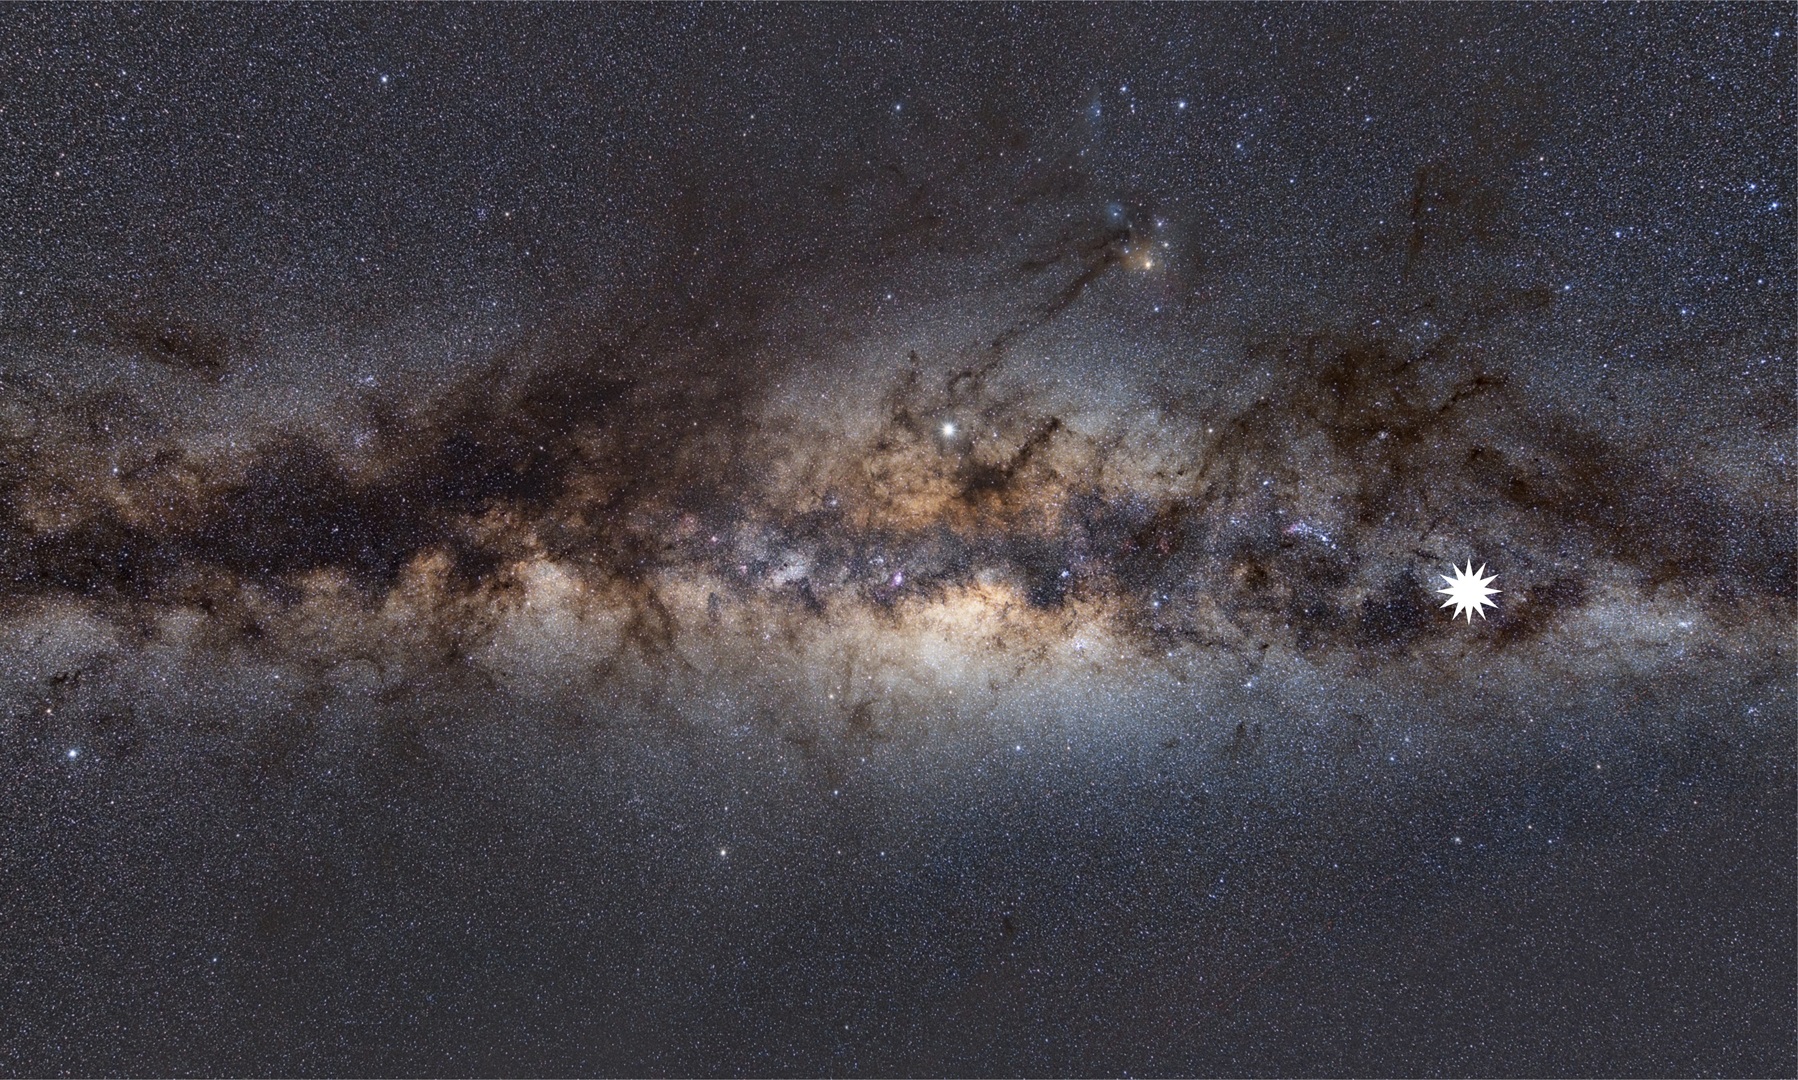 The Milky Way as viewed from Earth, with a star icon showing the position of the mysterious repeating transient. Dr Natasha Hurley-Walker (ICRAR/Curtin)